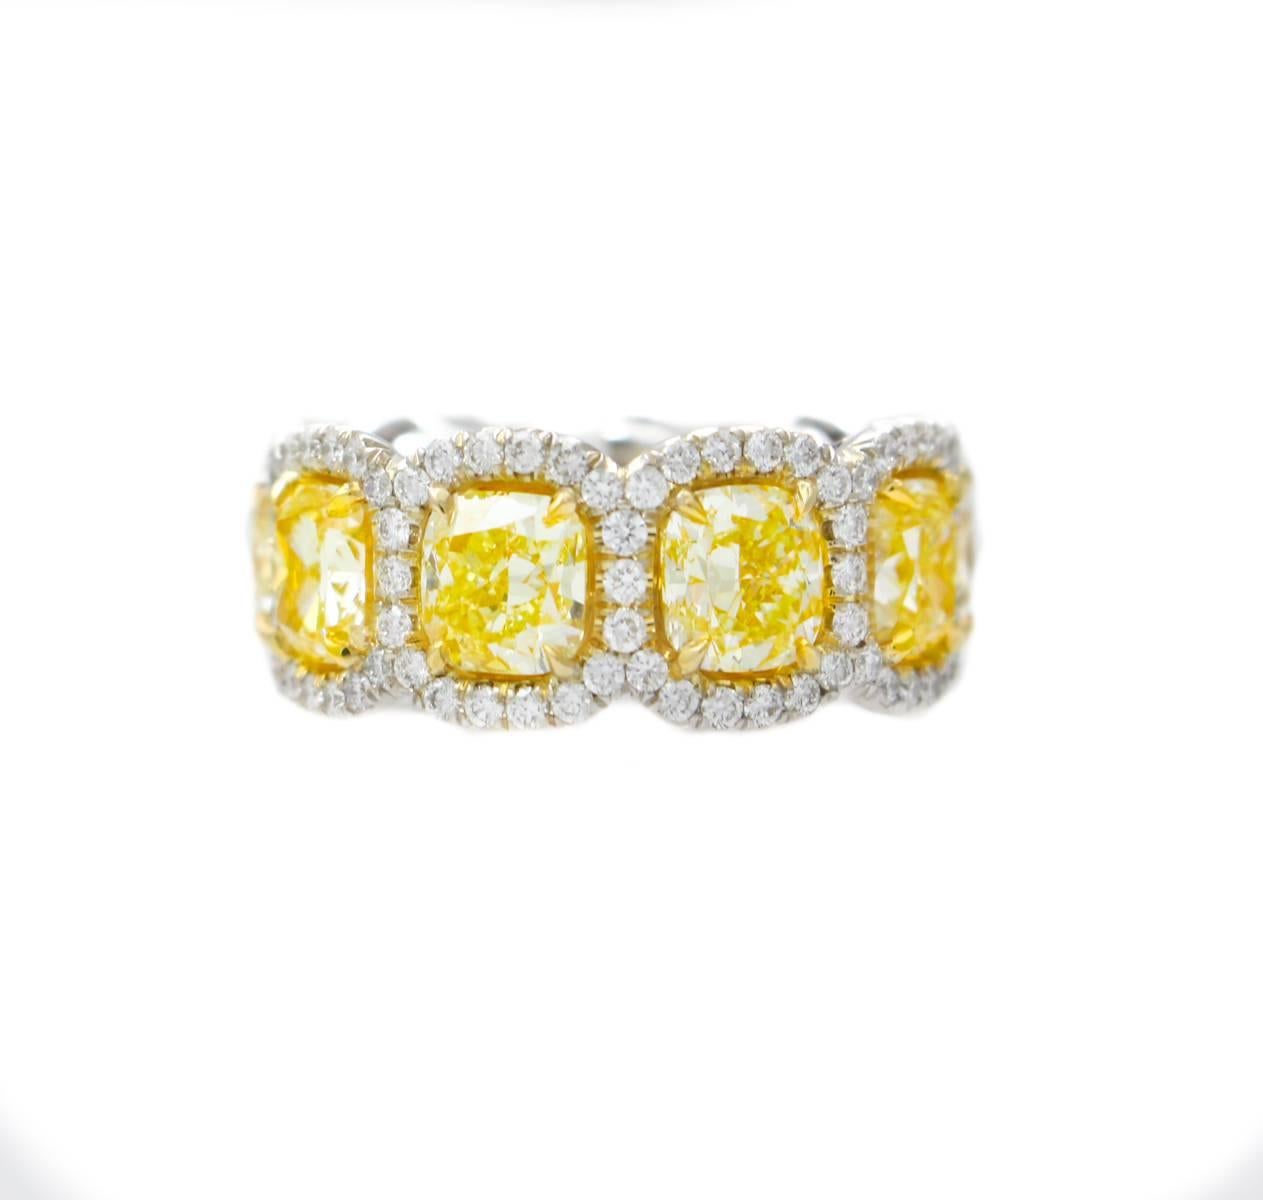 Magnificent Fancy Yellow diamond eternity band, features 9.50 Carats of Fancy Yellow Cushion Cut Diamonds, surrounded by 1.50 Carats of white round brilliant cut diamonds. Each stone is approximately 1.00 carats, cushion cut.
Beautiful vibrant